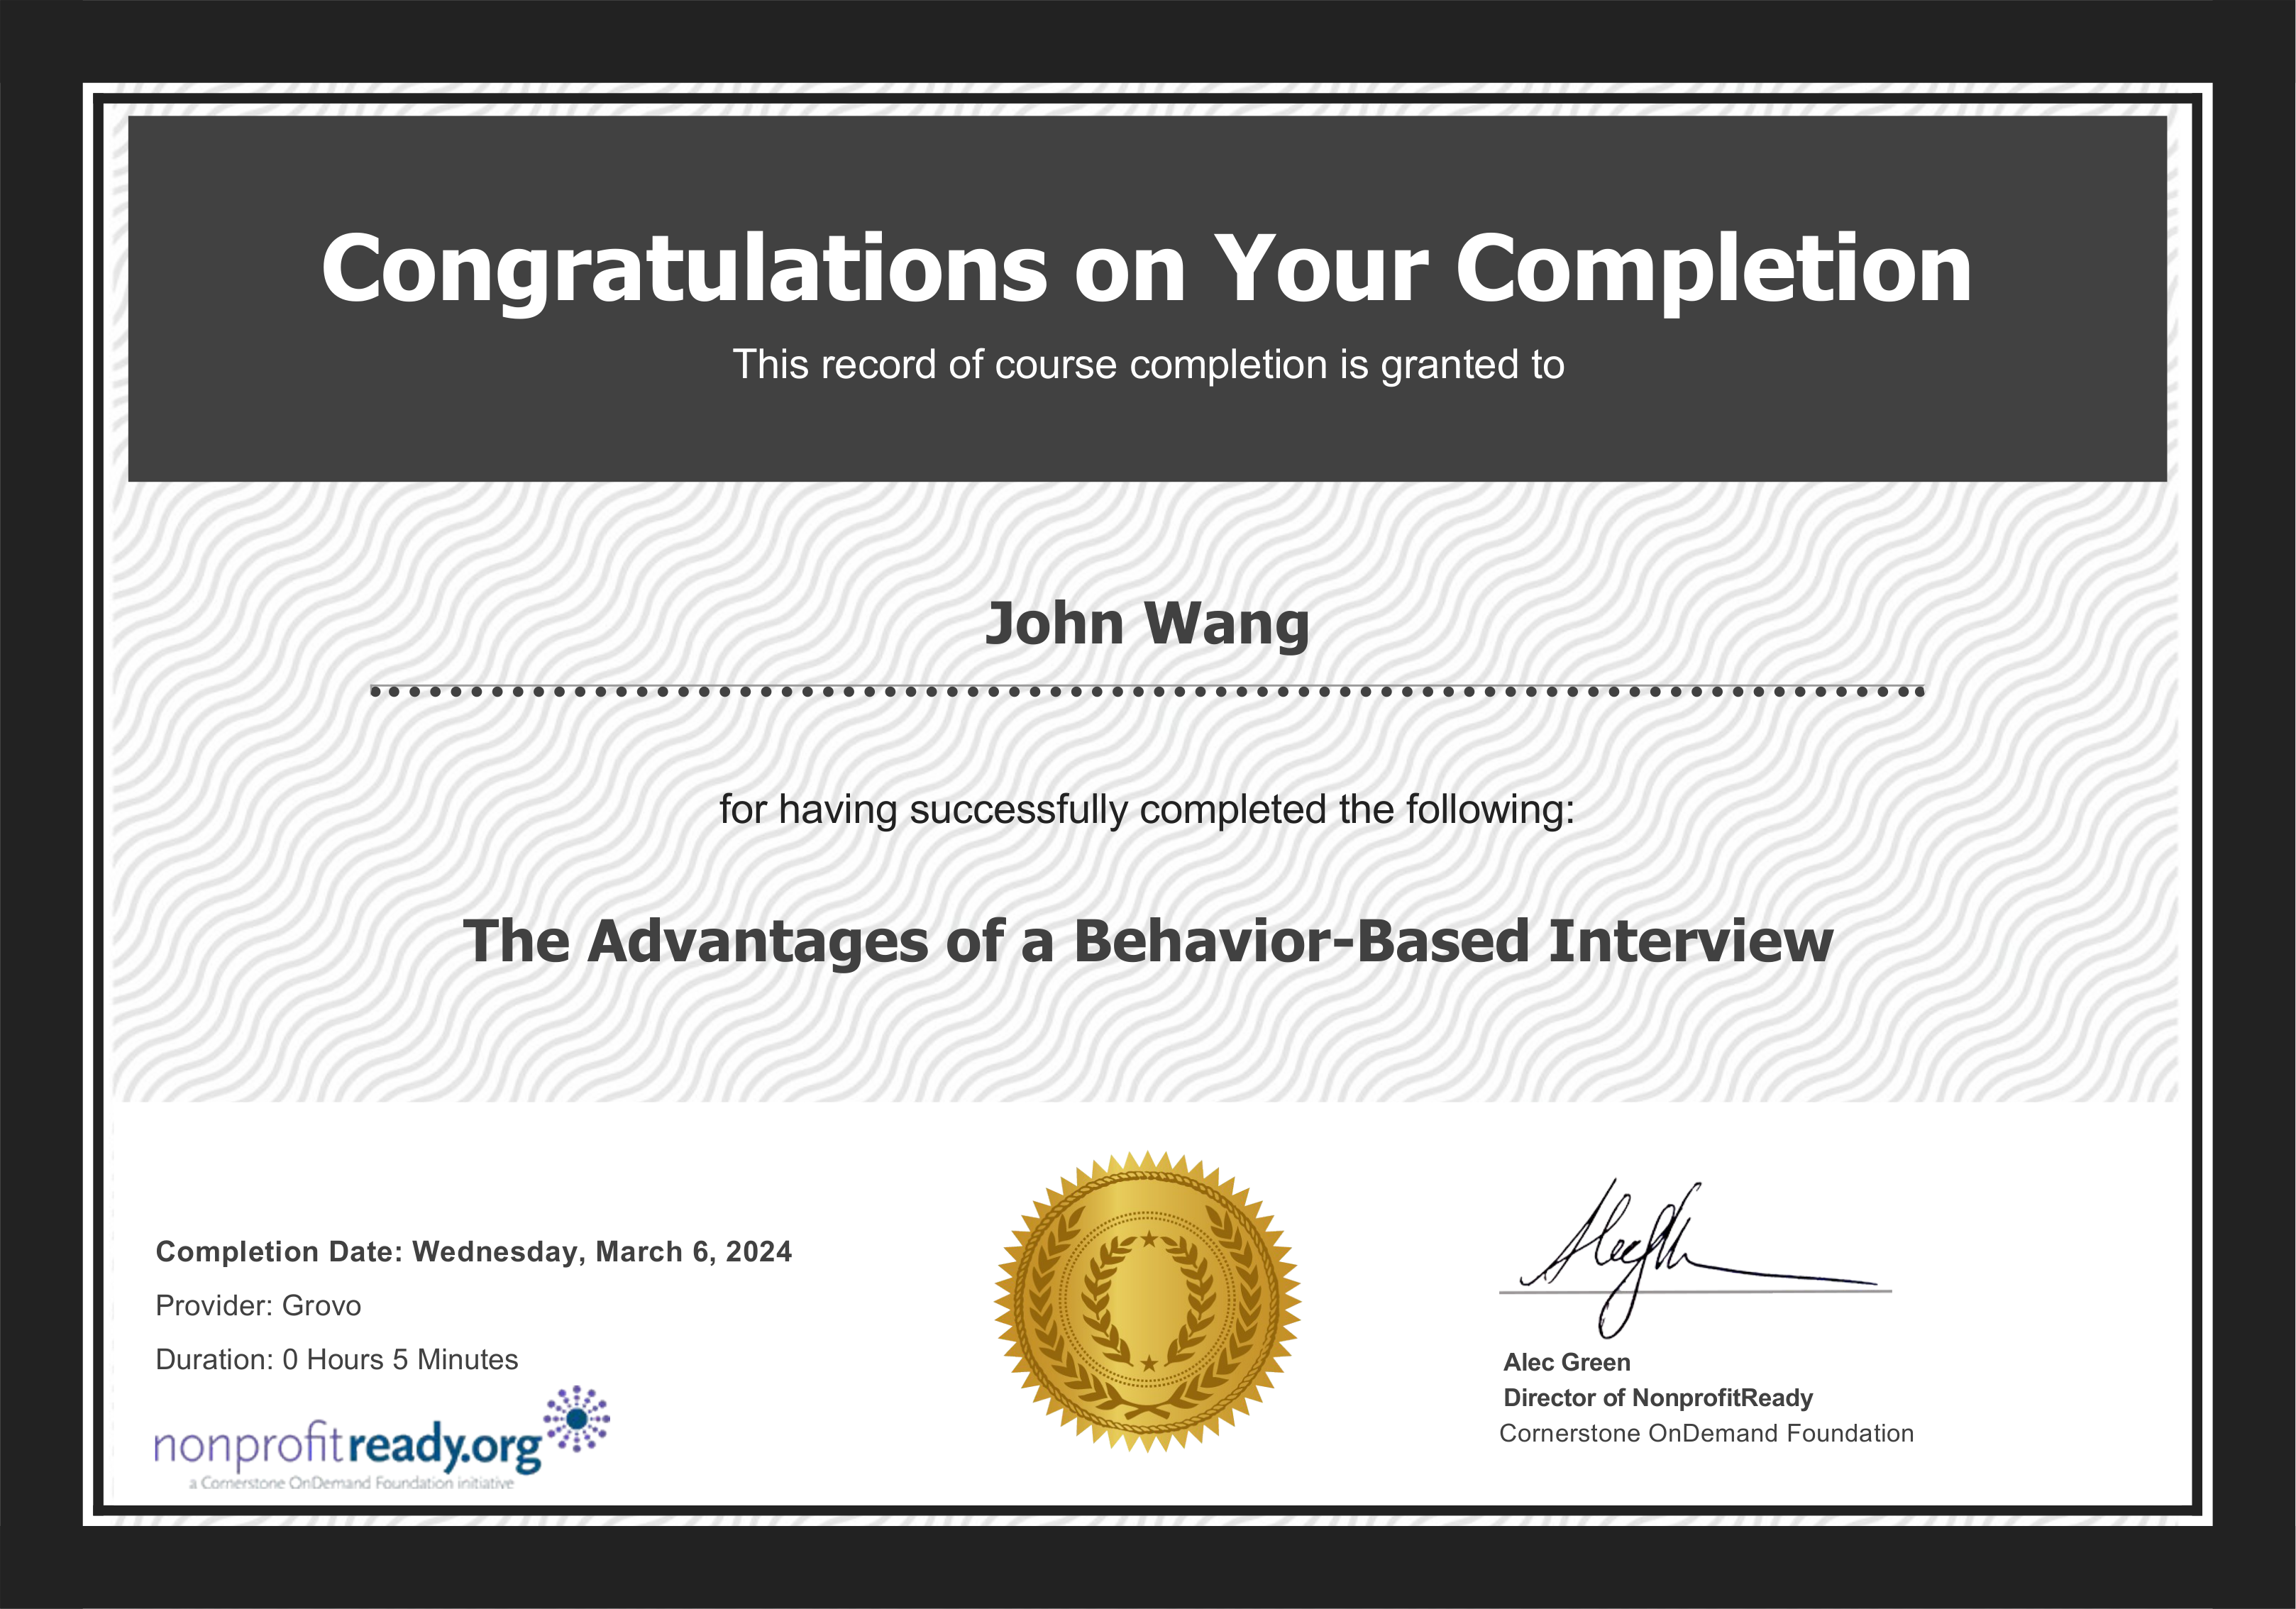 John's The Advantages of a Behavior-Based Interview from NonprofitReady by Grovo